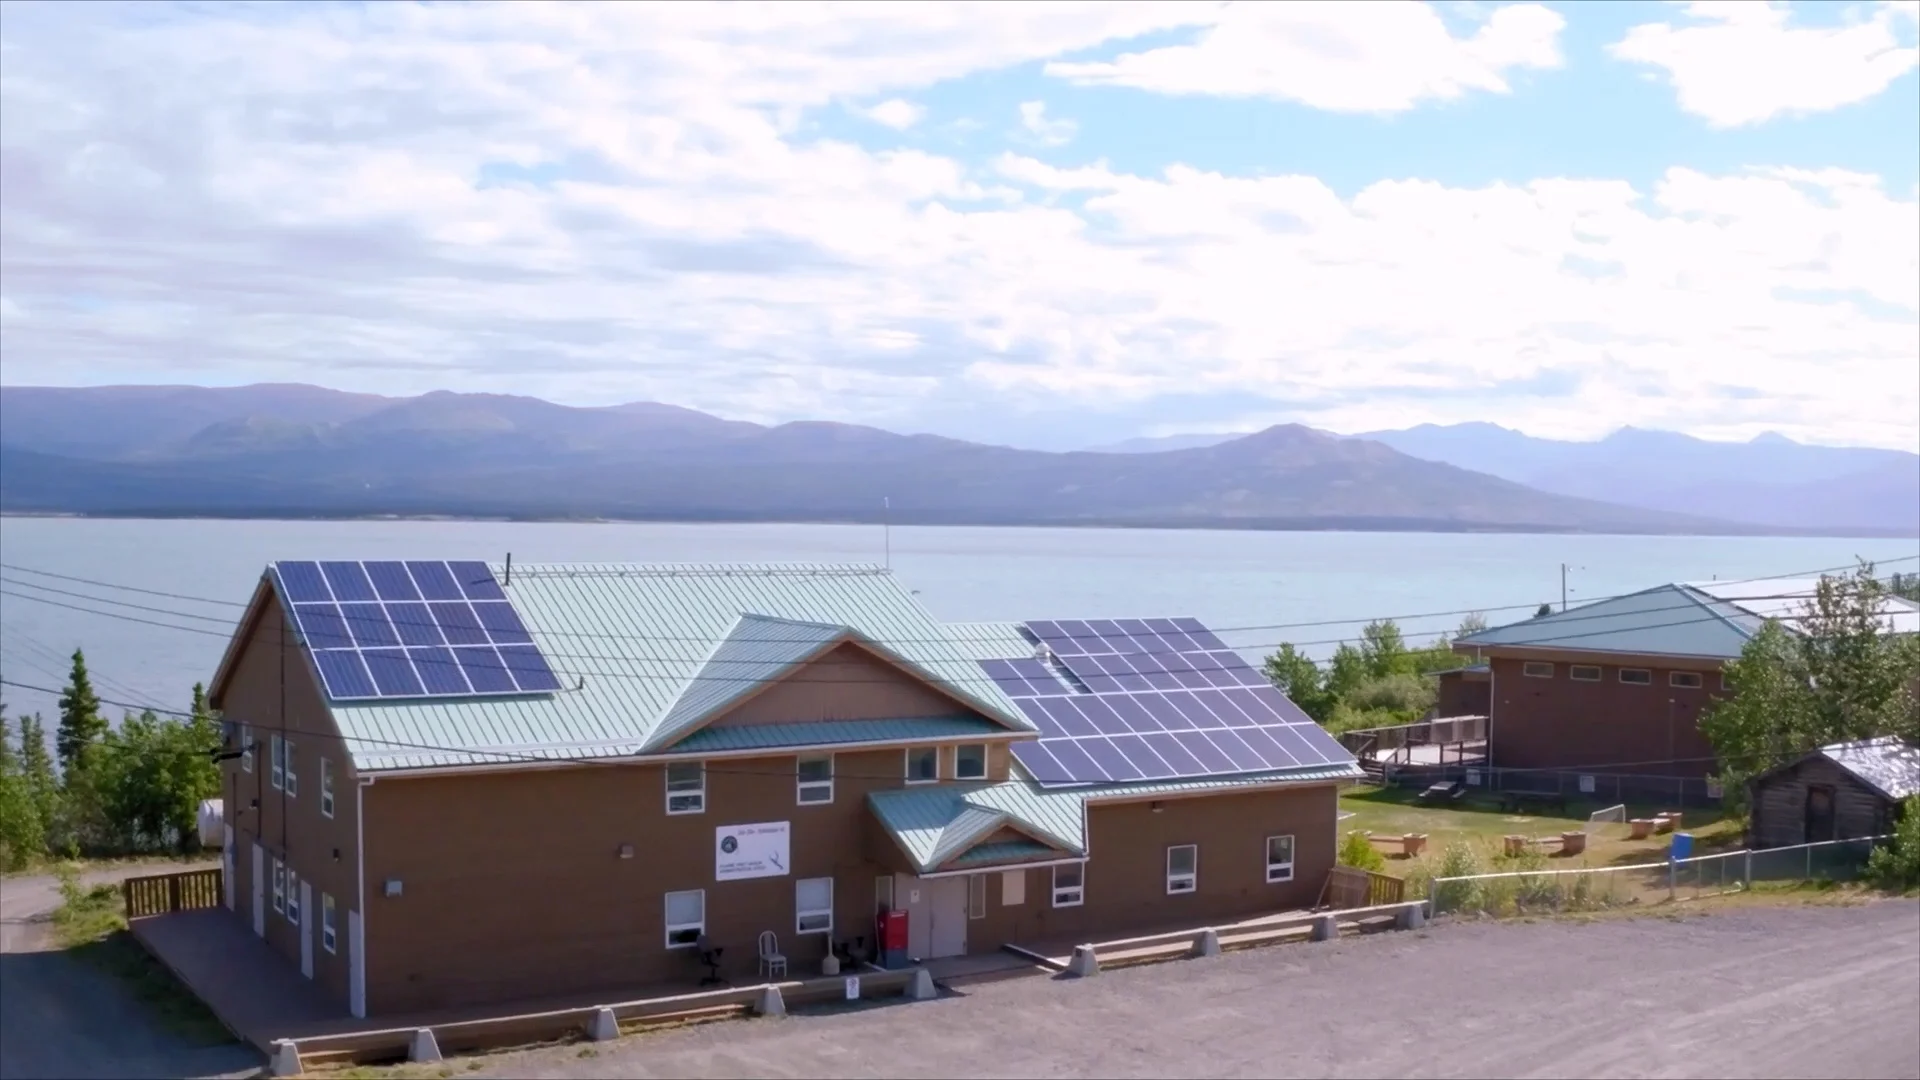 Solar panels on an administration building in Kluane. (Power to the People)